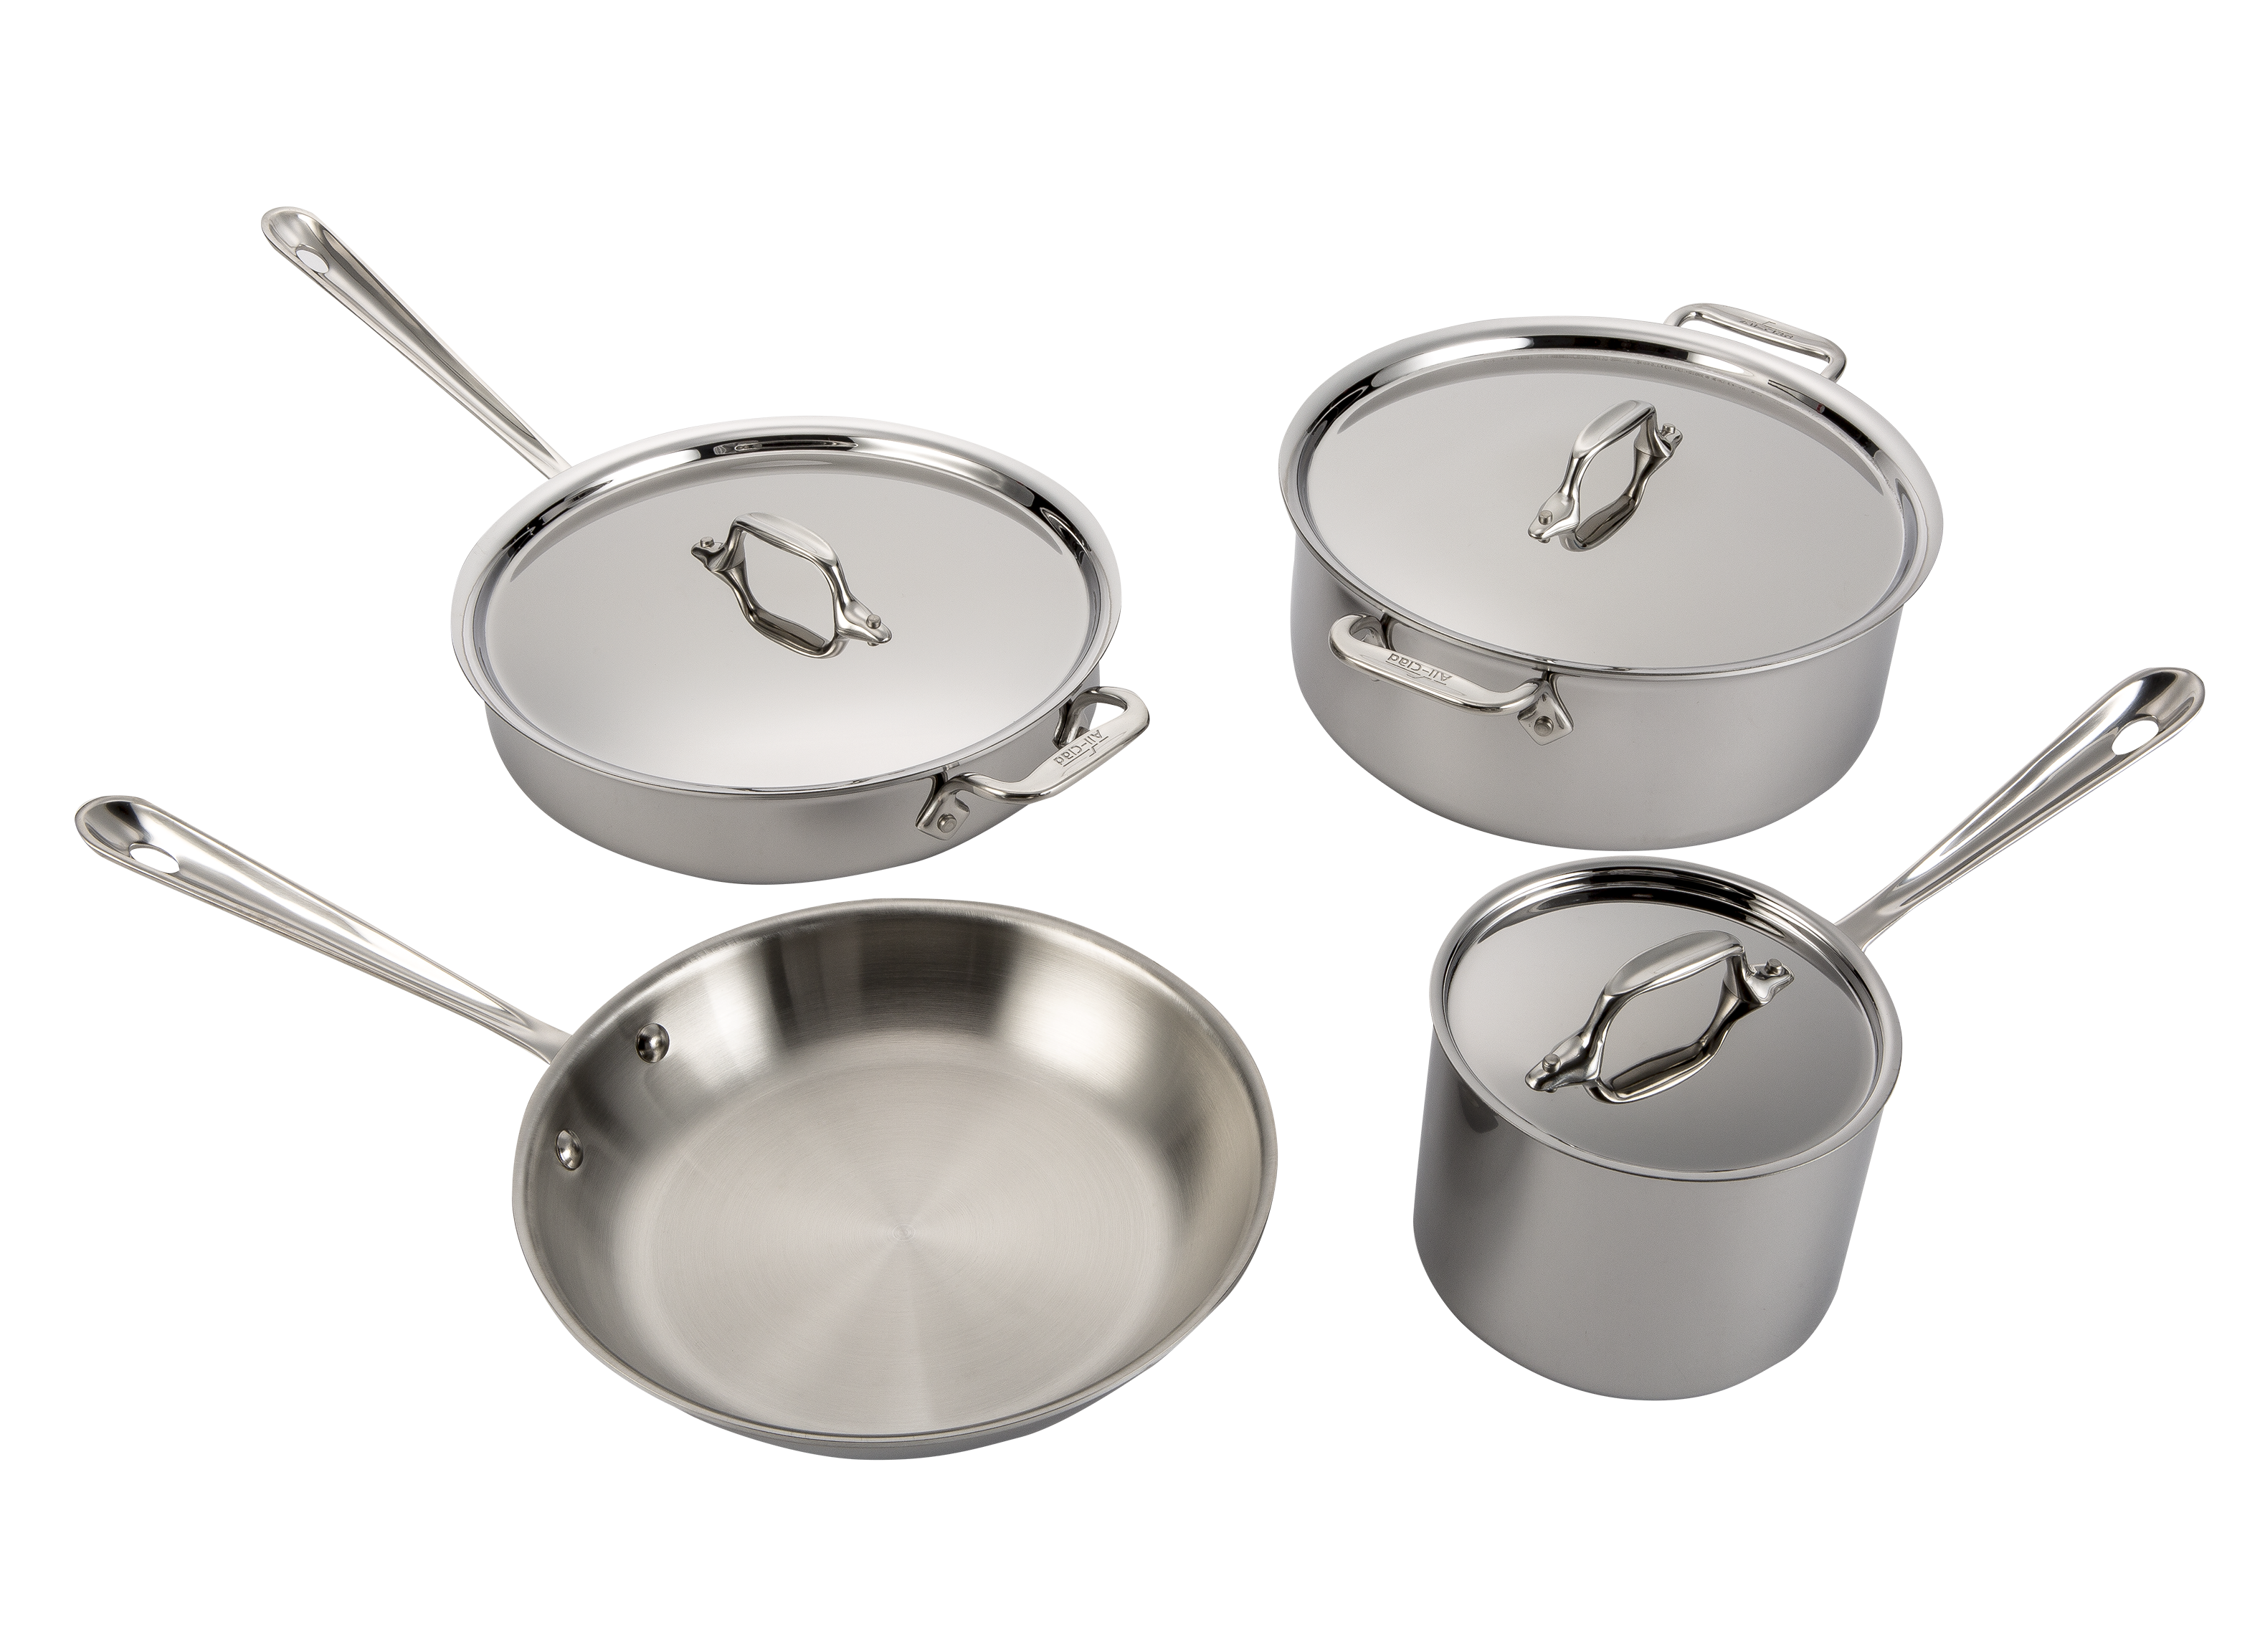 https://crdms.images.consumerreports.org/prod/products/cr/models/386837-cookware-allclad-stainlesssteel7piece.png